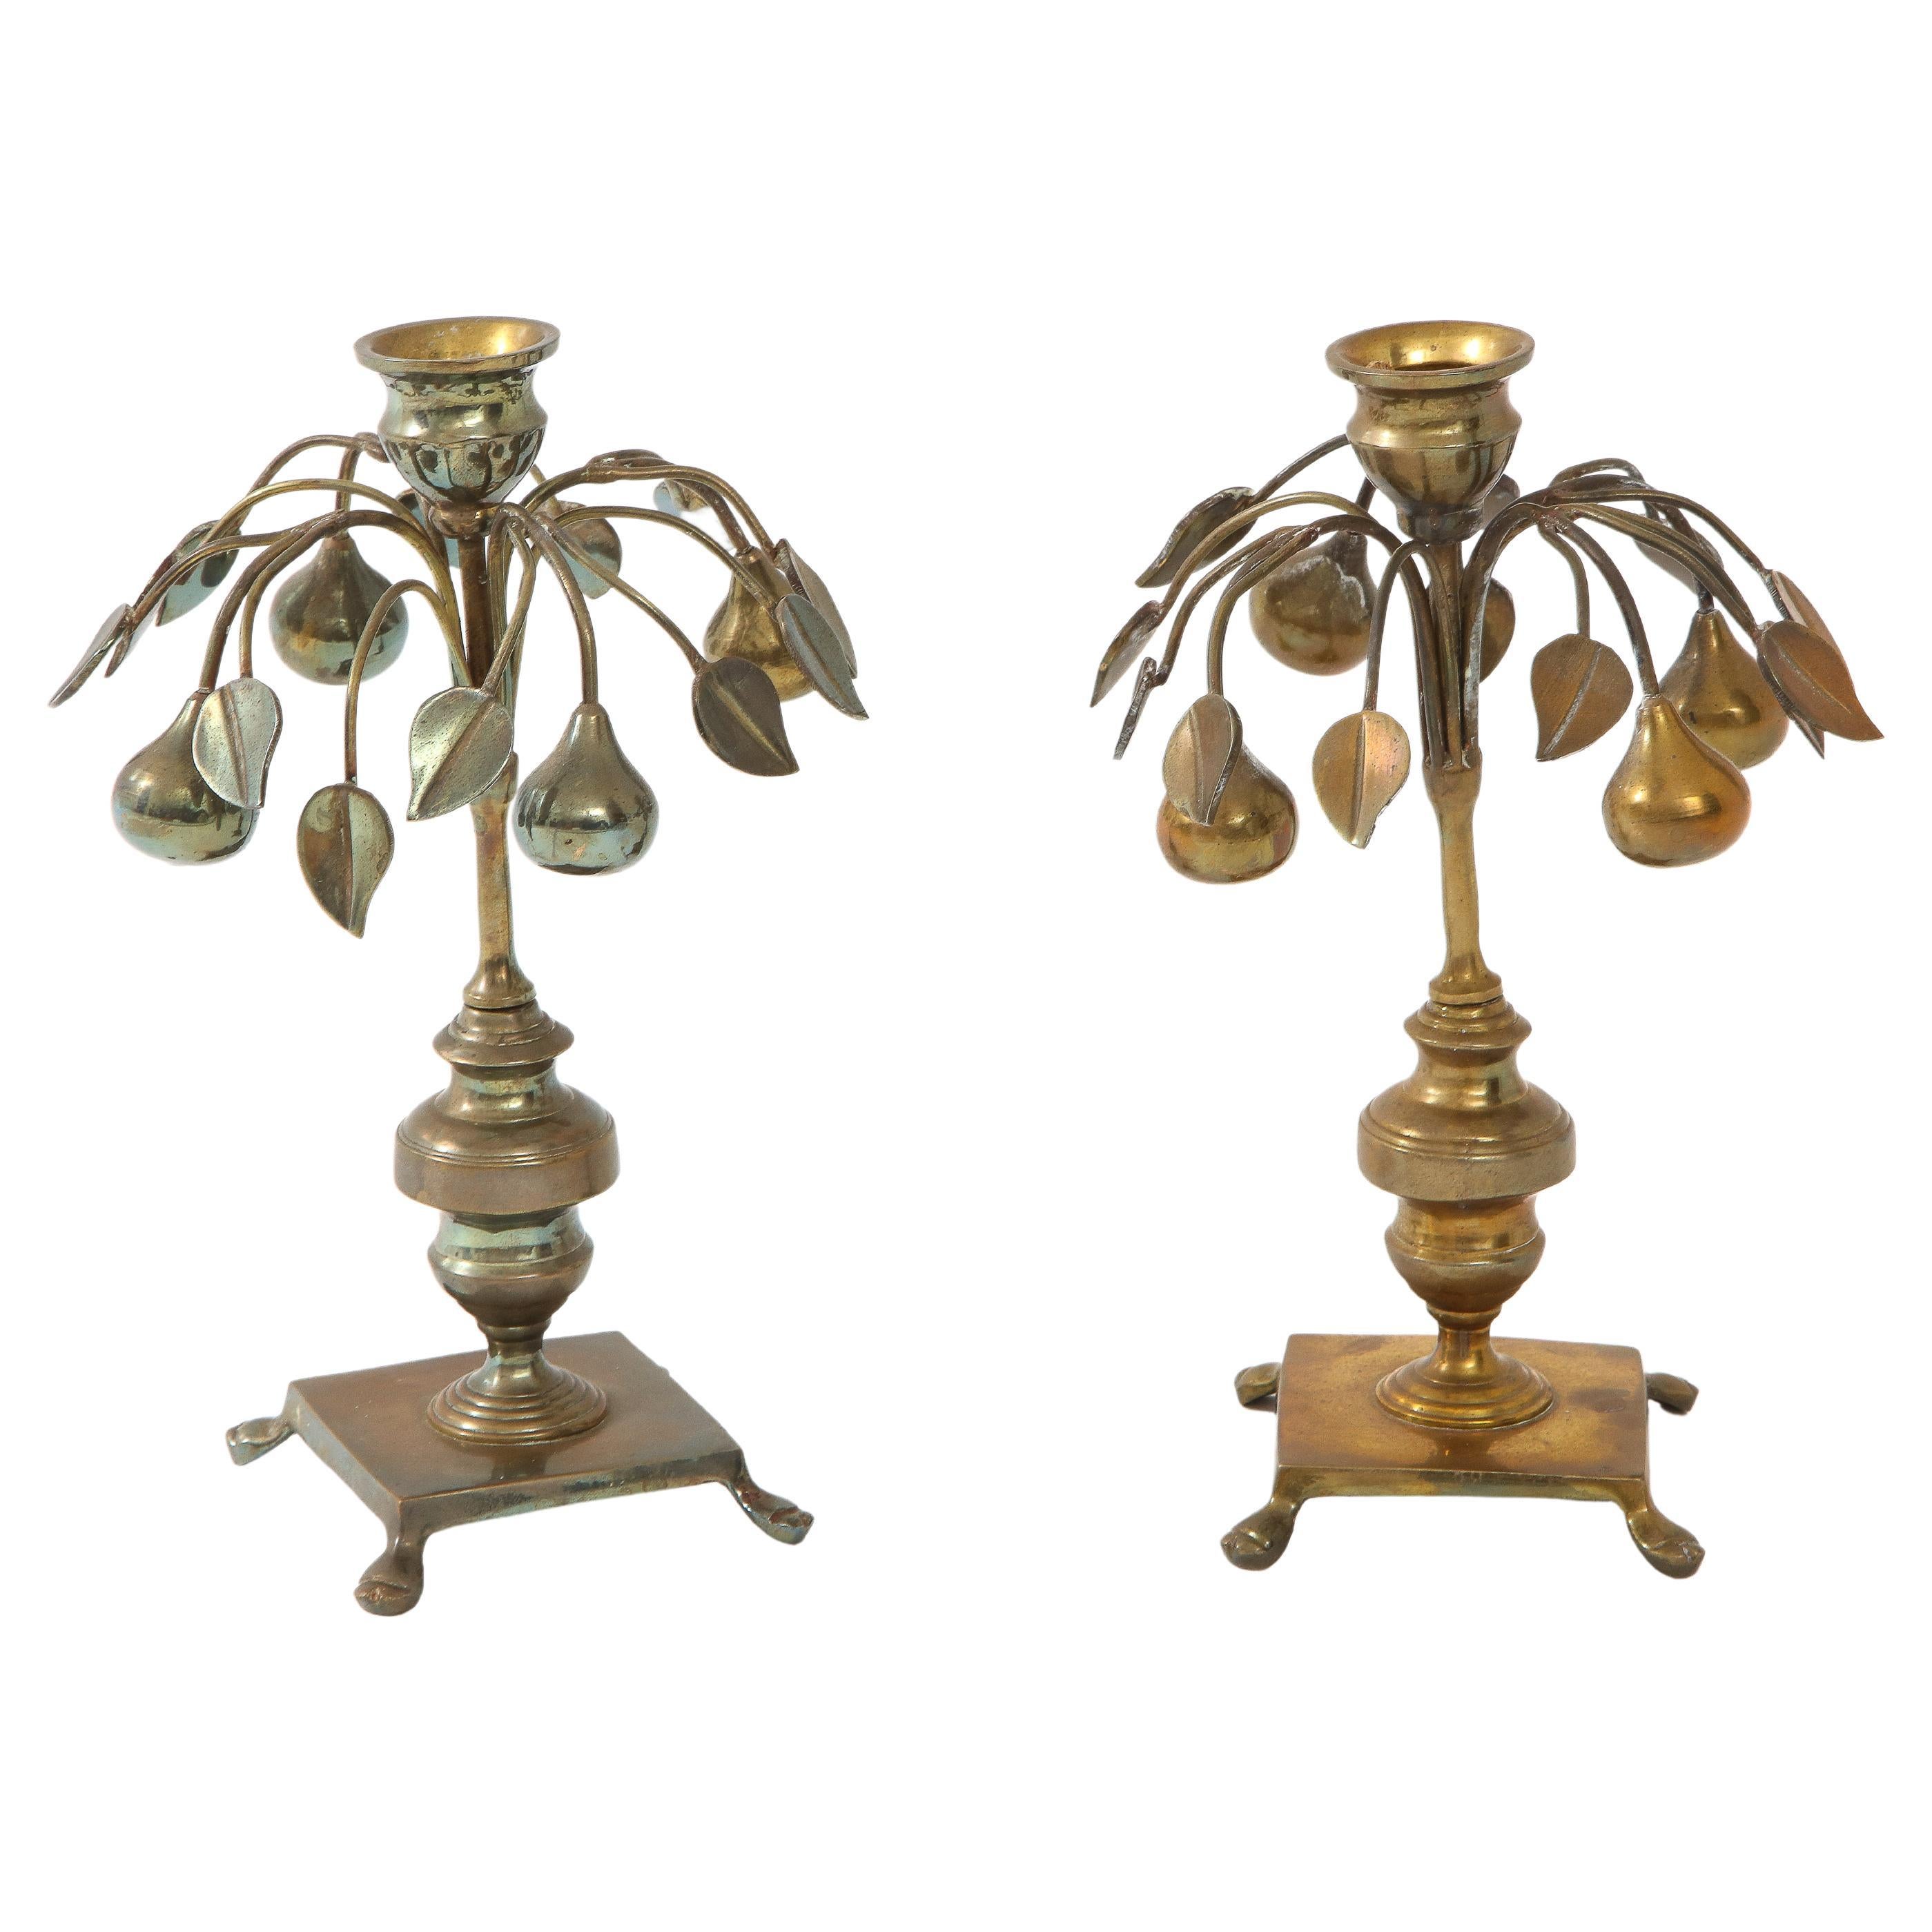 Pair of silver plate stylized pear and leaf motof candlesticks on a traditional central post. Stamped Mottahedeh. We have left the patina on the silver, could be polished.